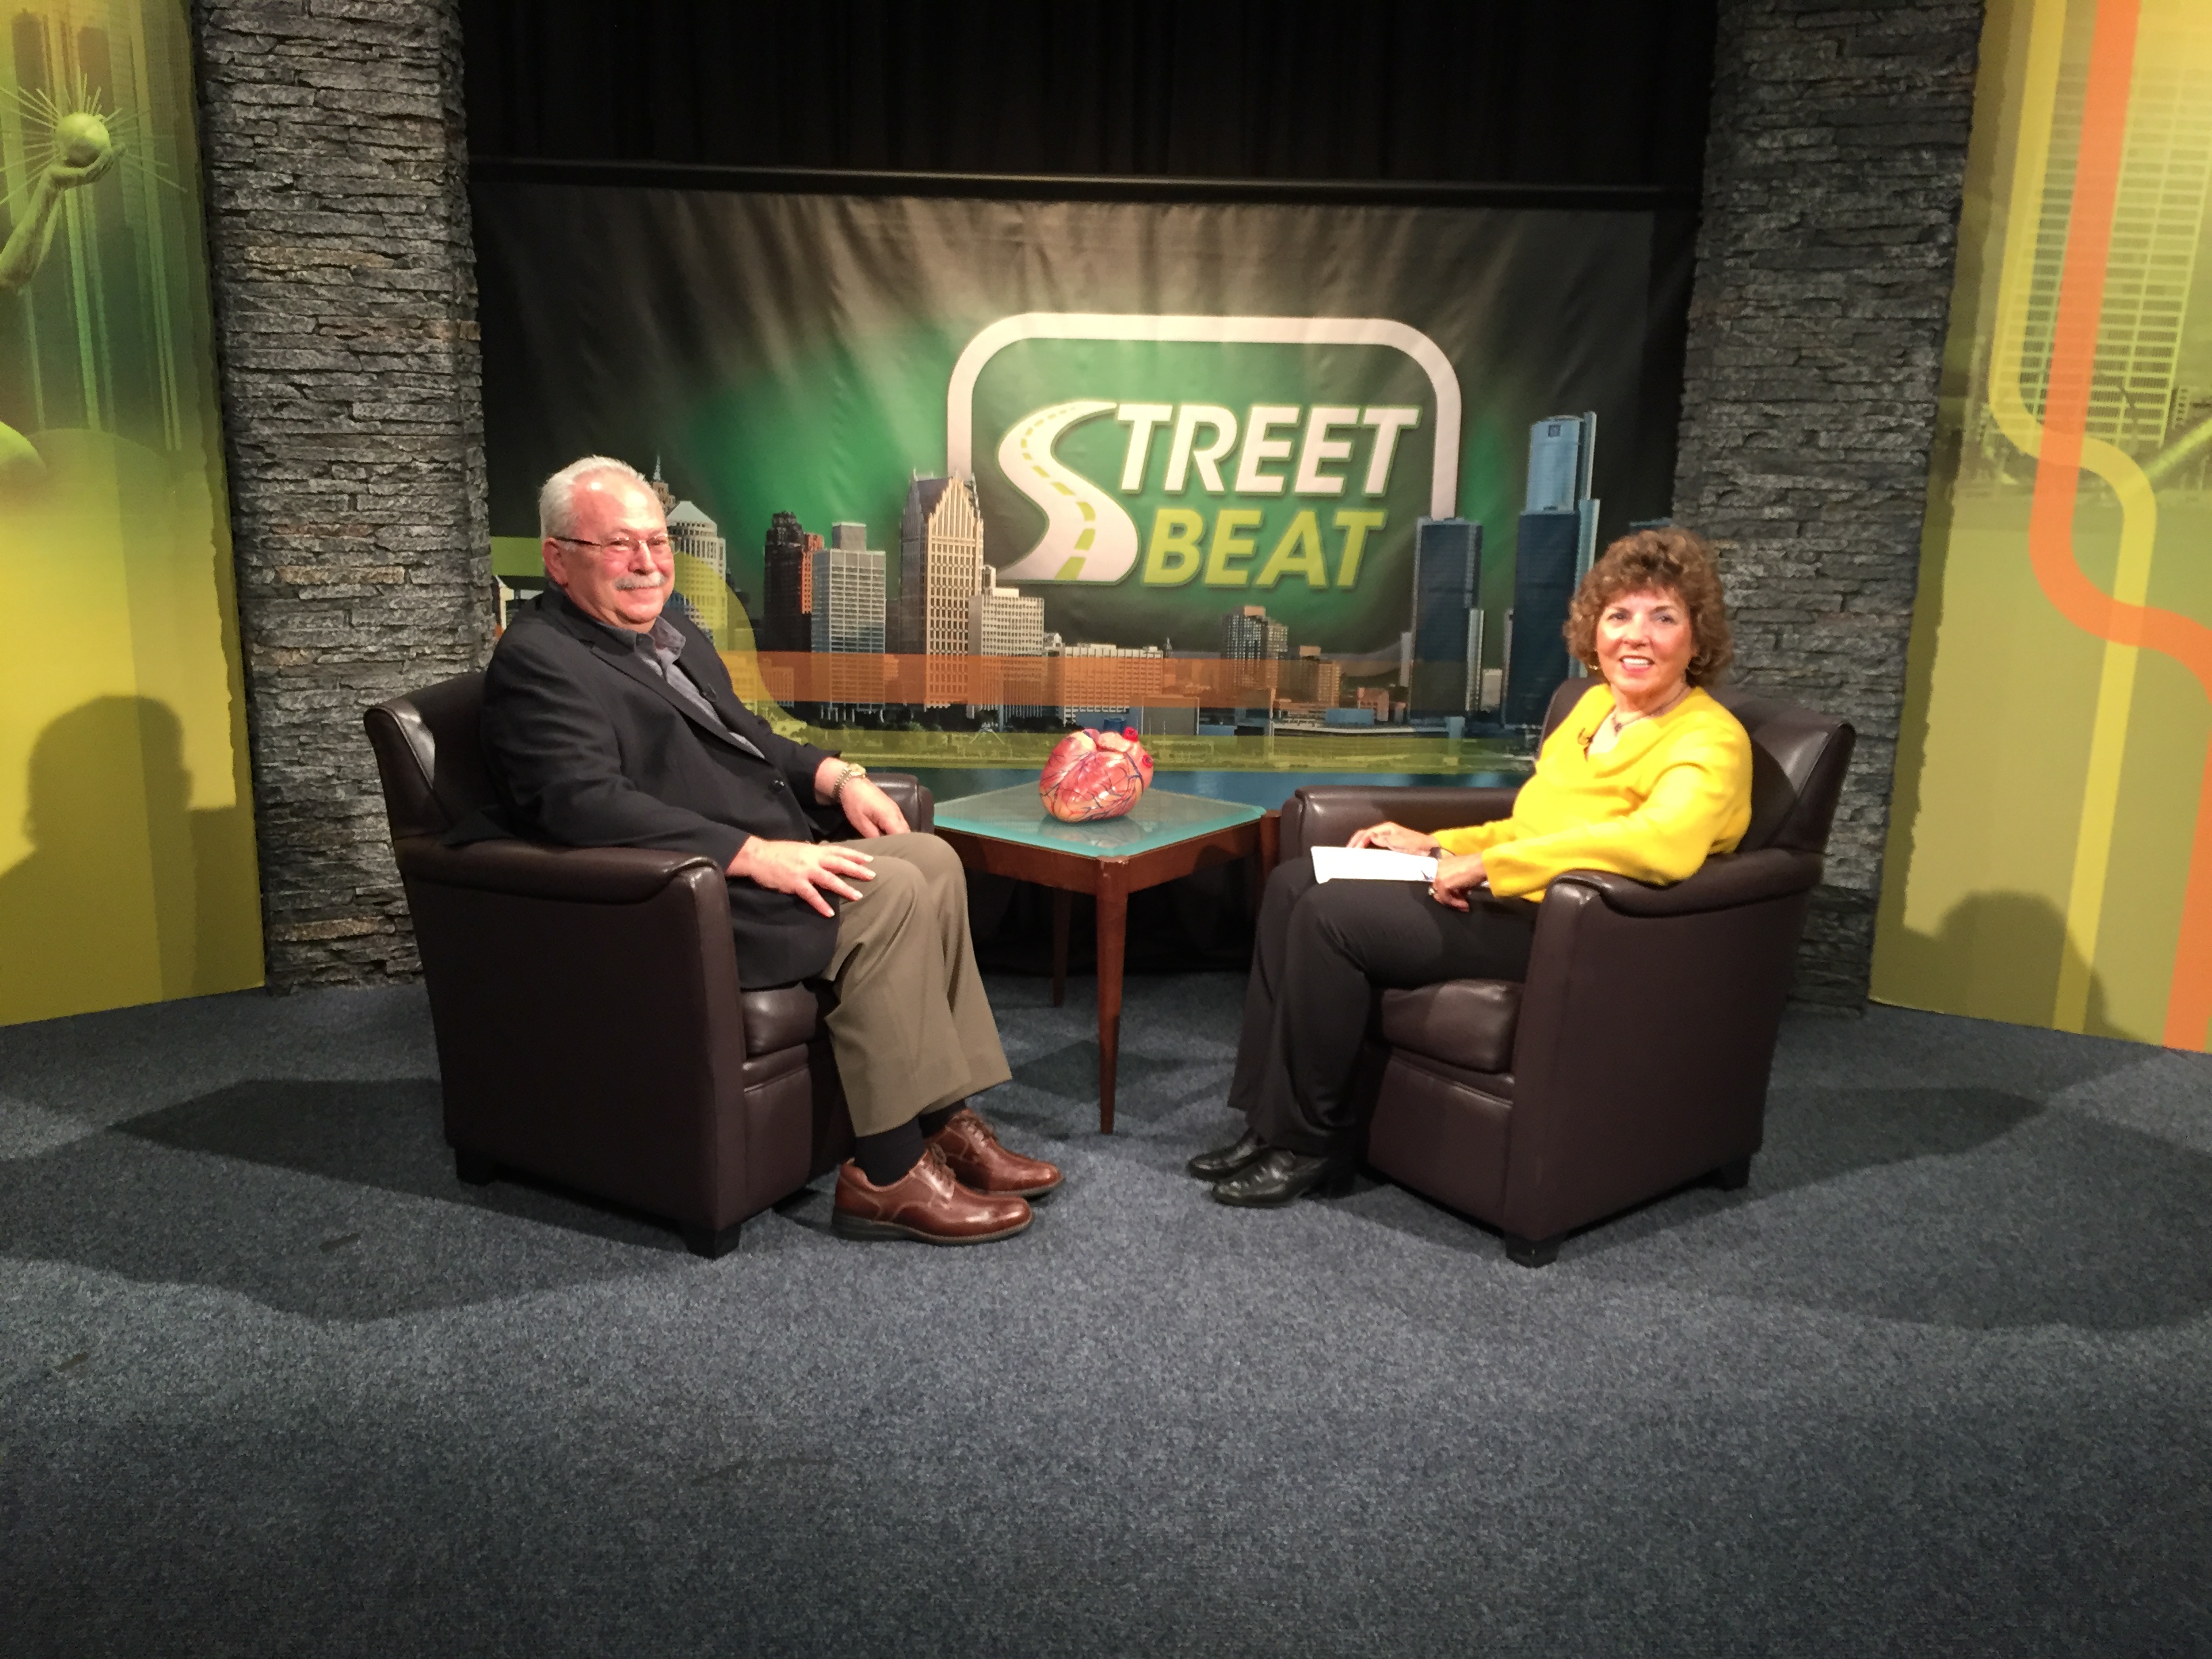 Dr. Jeffery Zaks, a cardiologist with Providence Hospital, talks about heart-related issues with Street Beat host Amyre Makupson. (credit: Matt Christopherson/CW50)